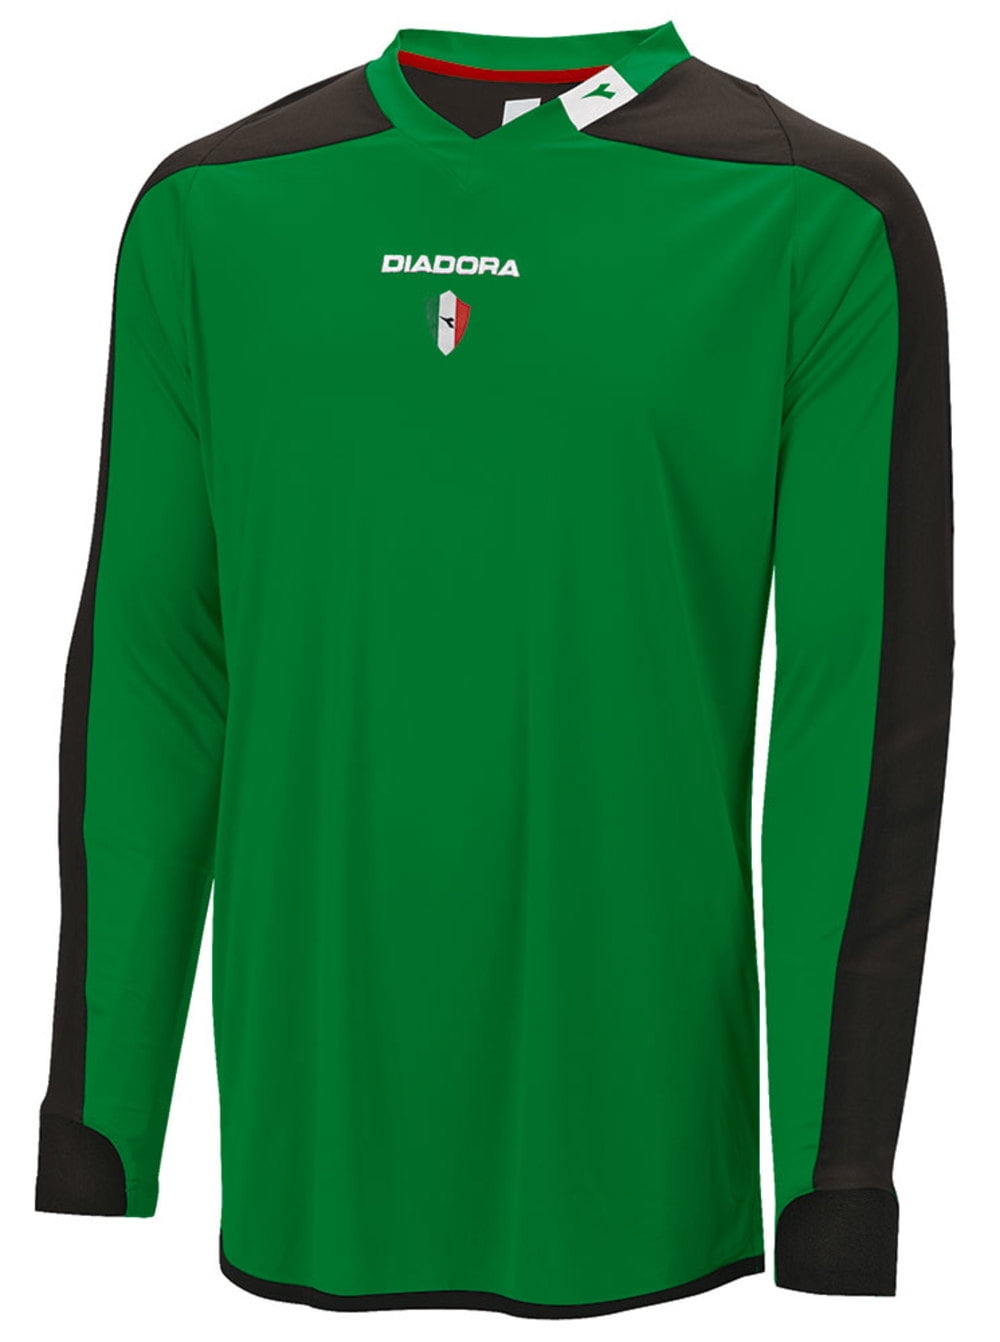 Youth Large, Lime Green Diadora Enzo Soccer Goalkeeper Jersey 